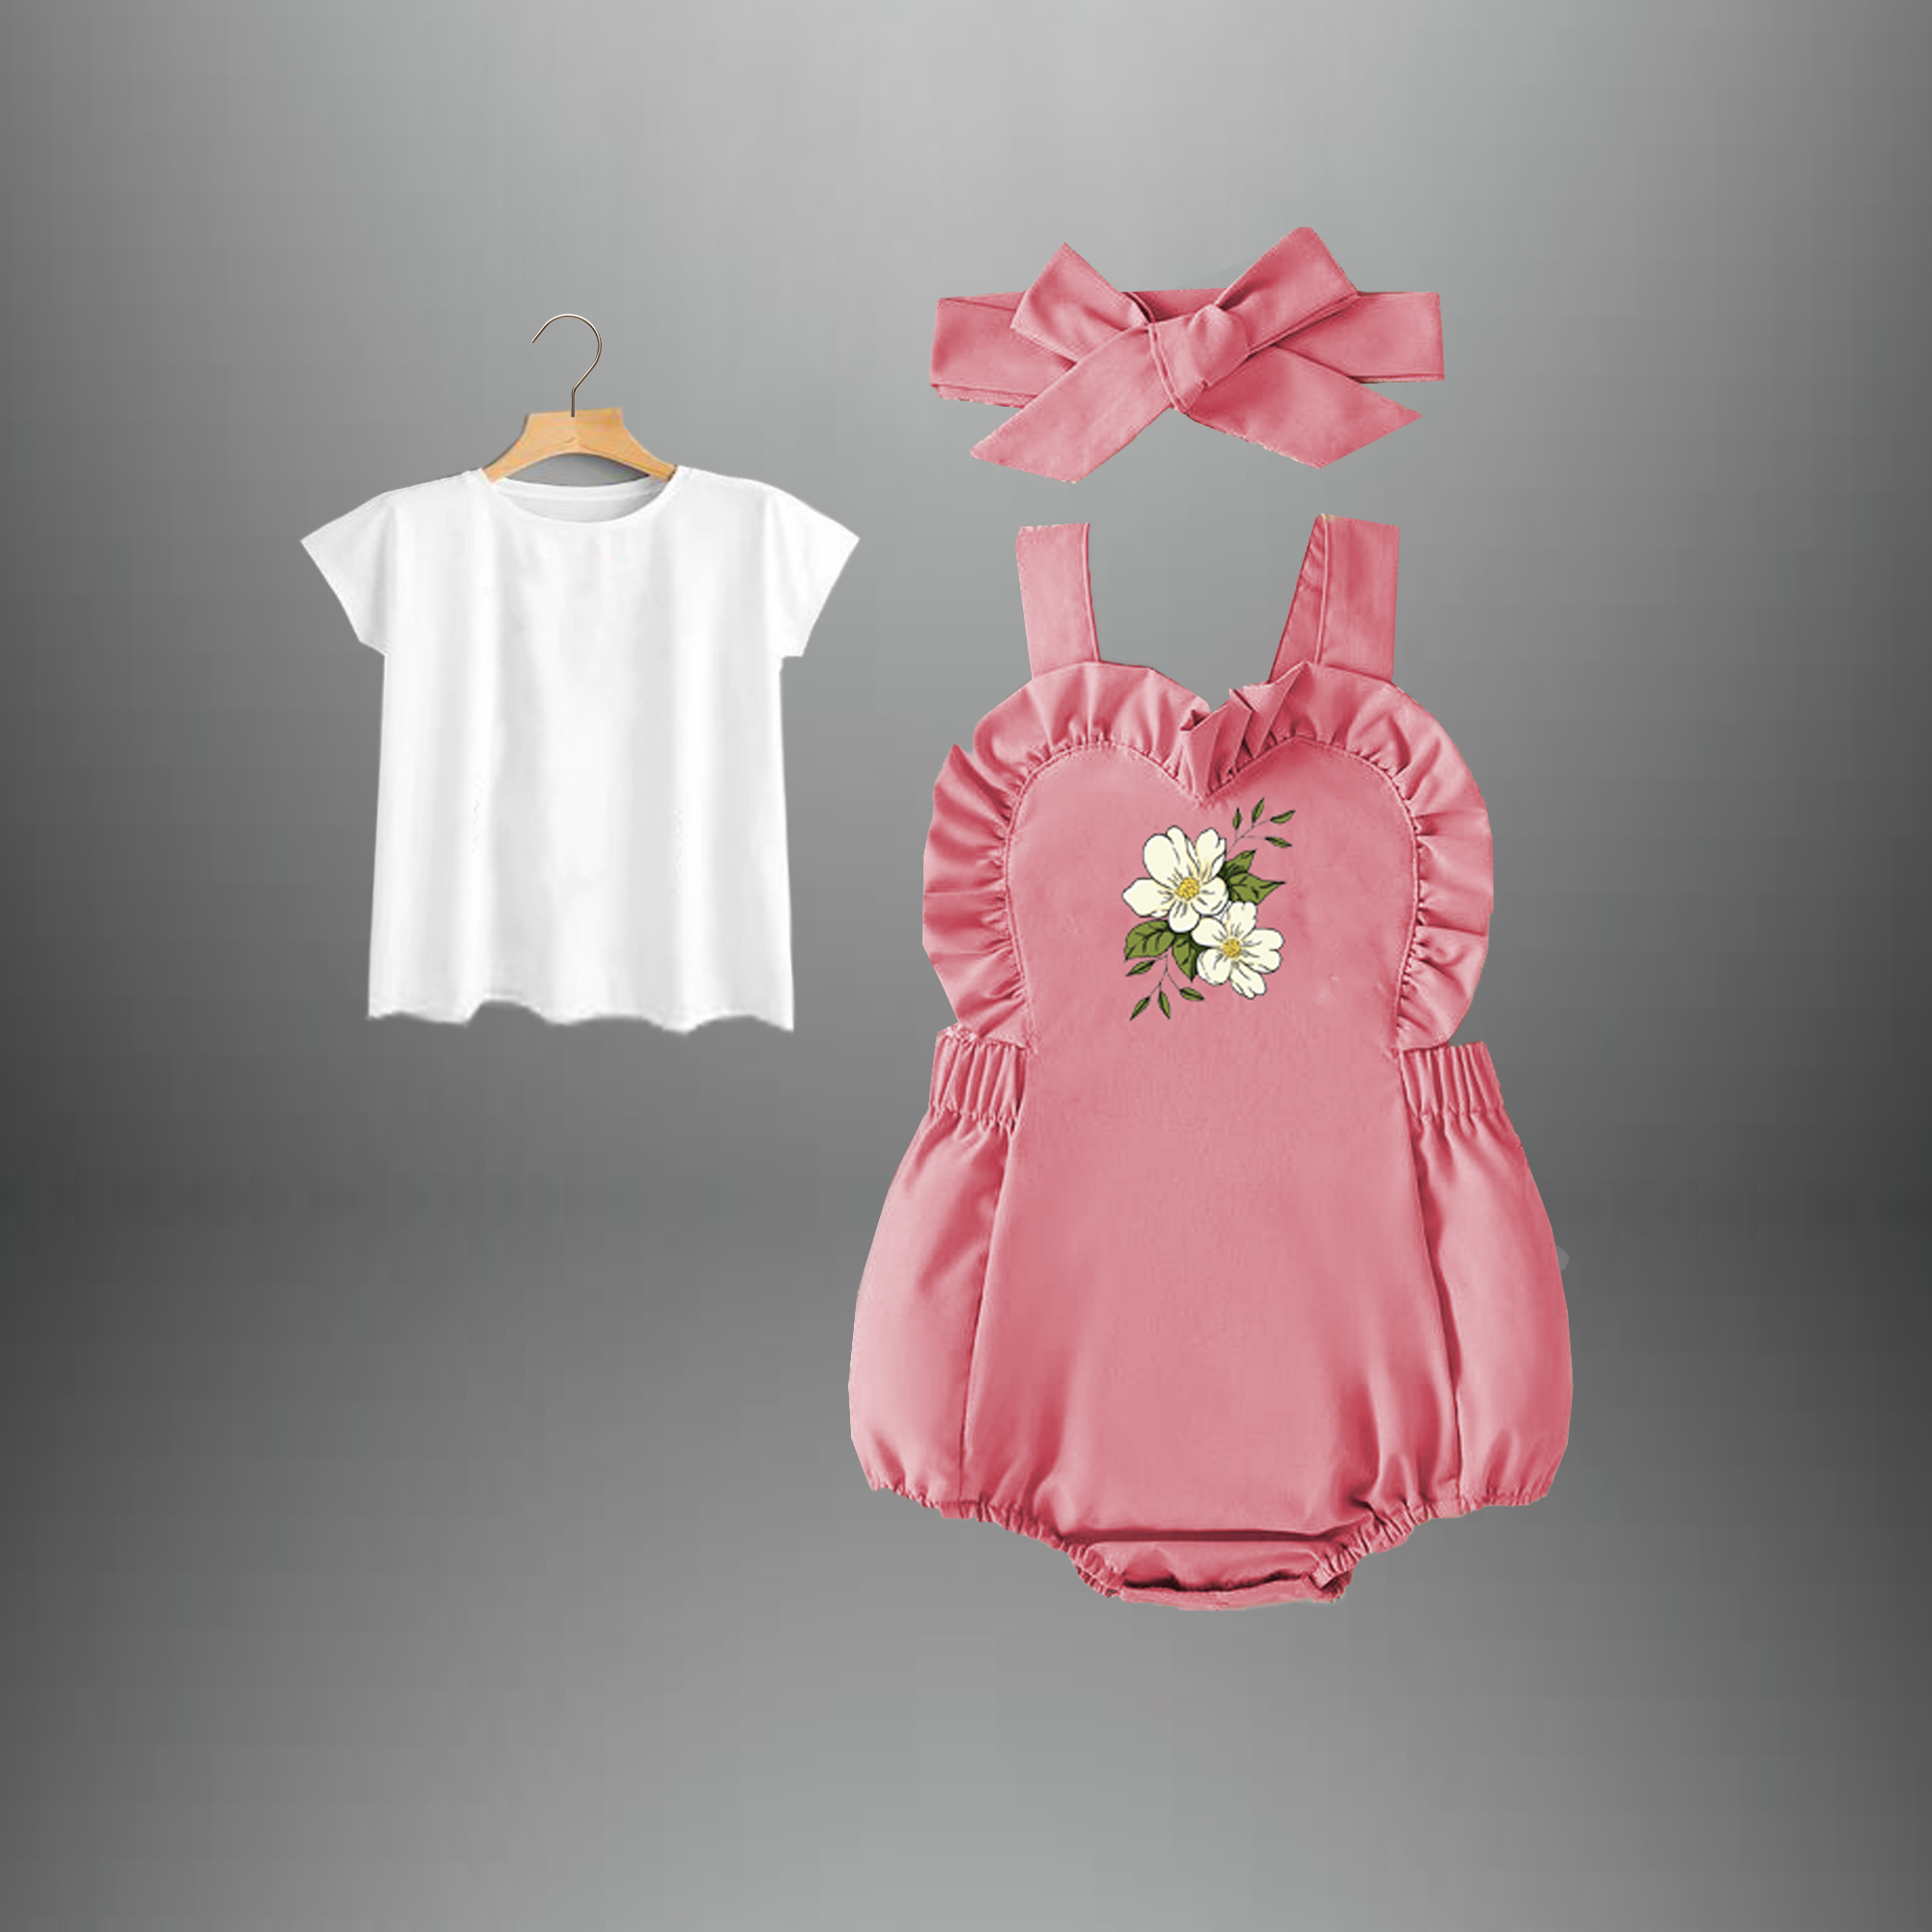 Baby girl's 2 Piece Set of romper with heart shaped frills and floral motif and a t-shirt with free hairband-RKFCTT068